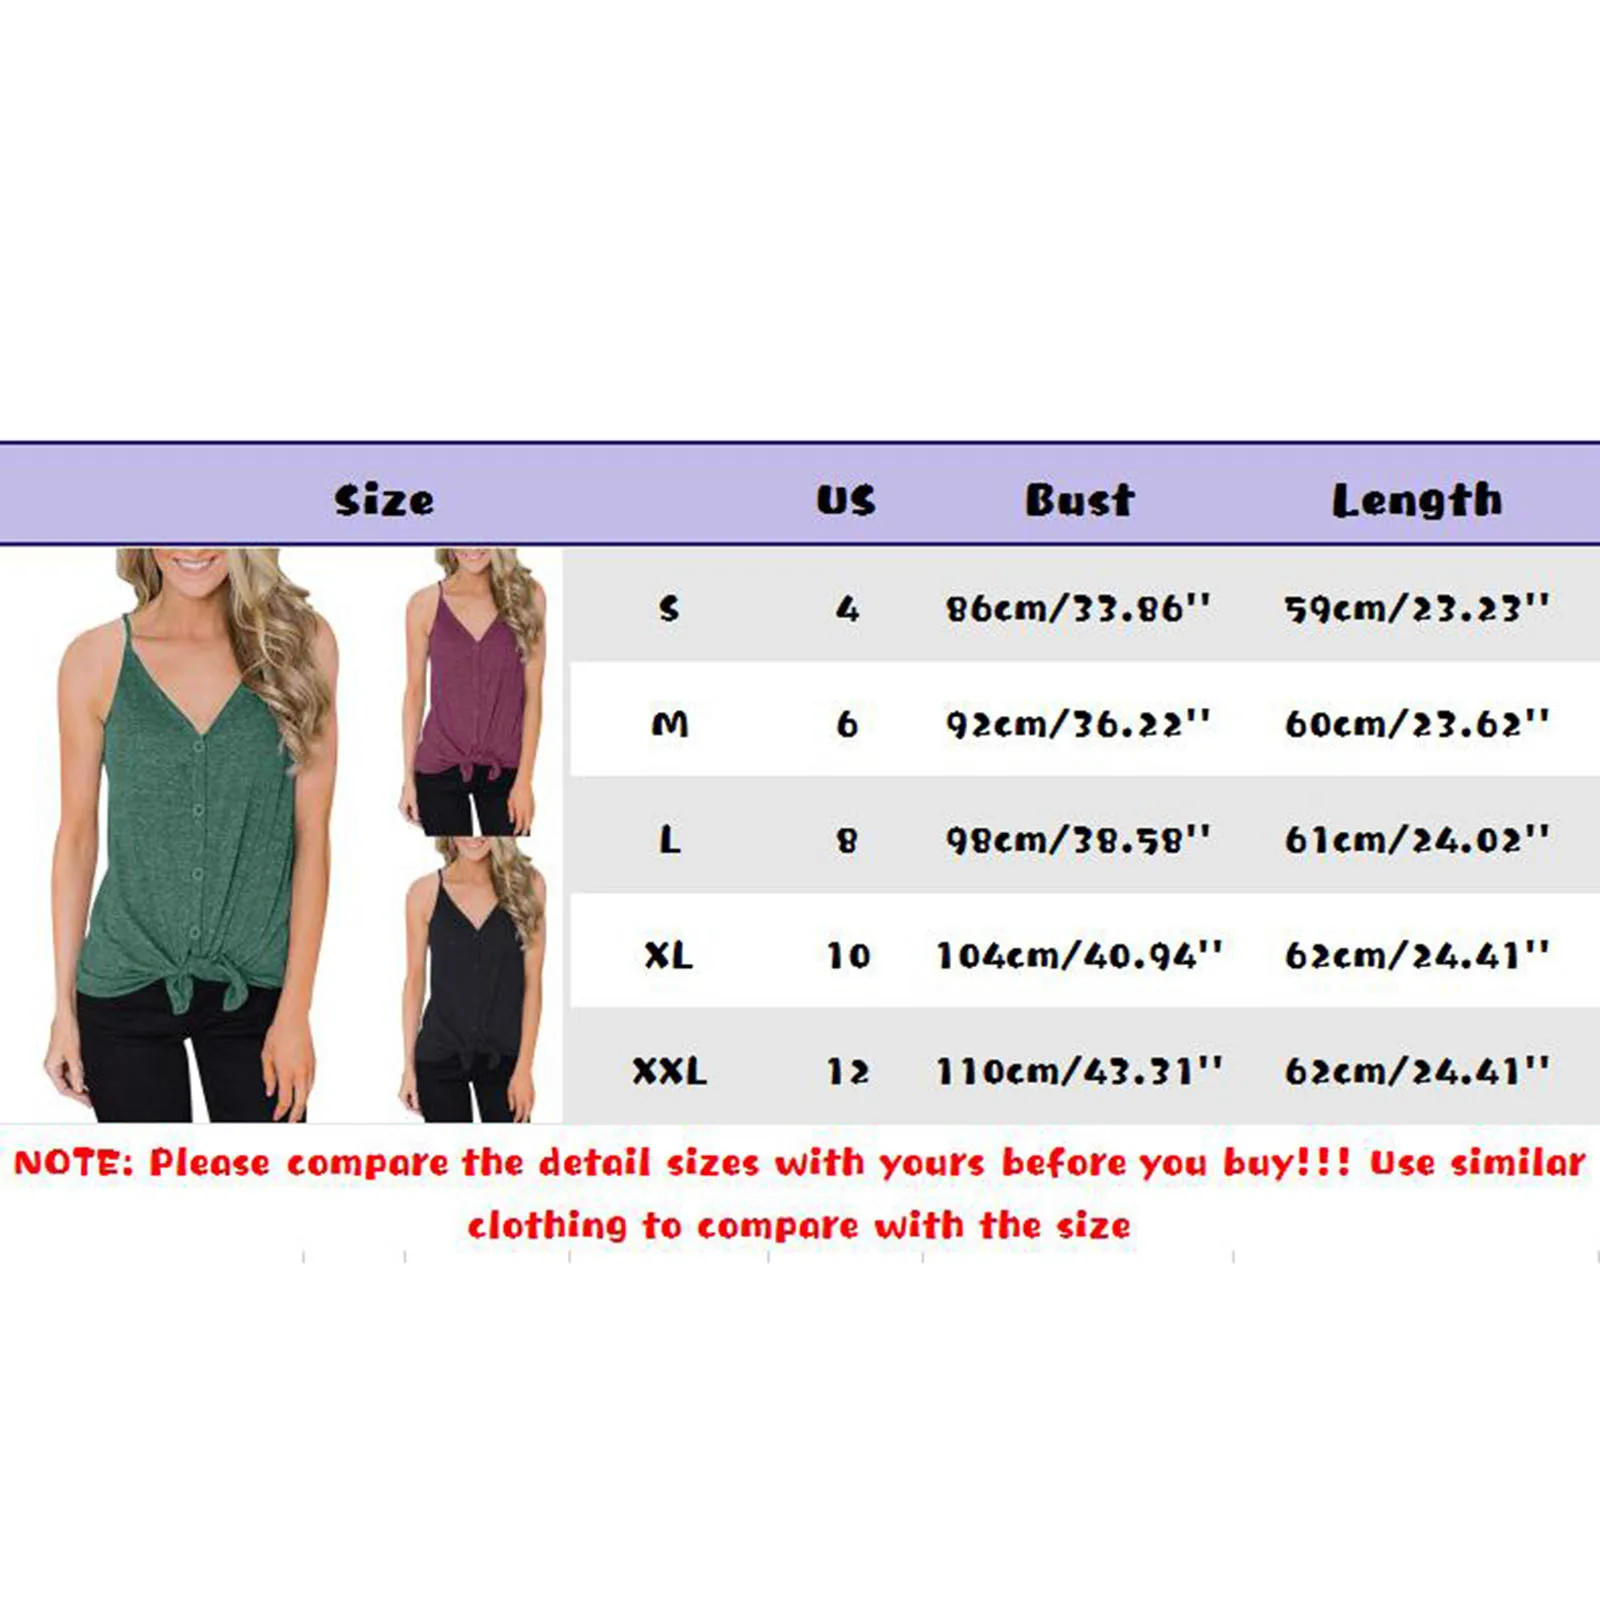 Women Basic Bandages Sleeveless Vest Summer Solid Color Top Crochet V-neck Tank Tops Female Sleeveless Vest Green Soft Tees sexy camisole